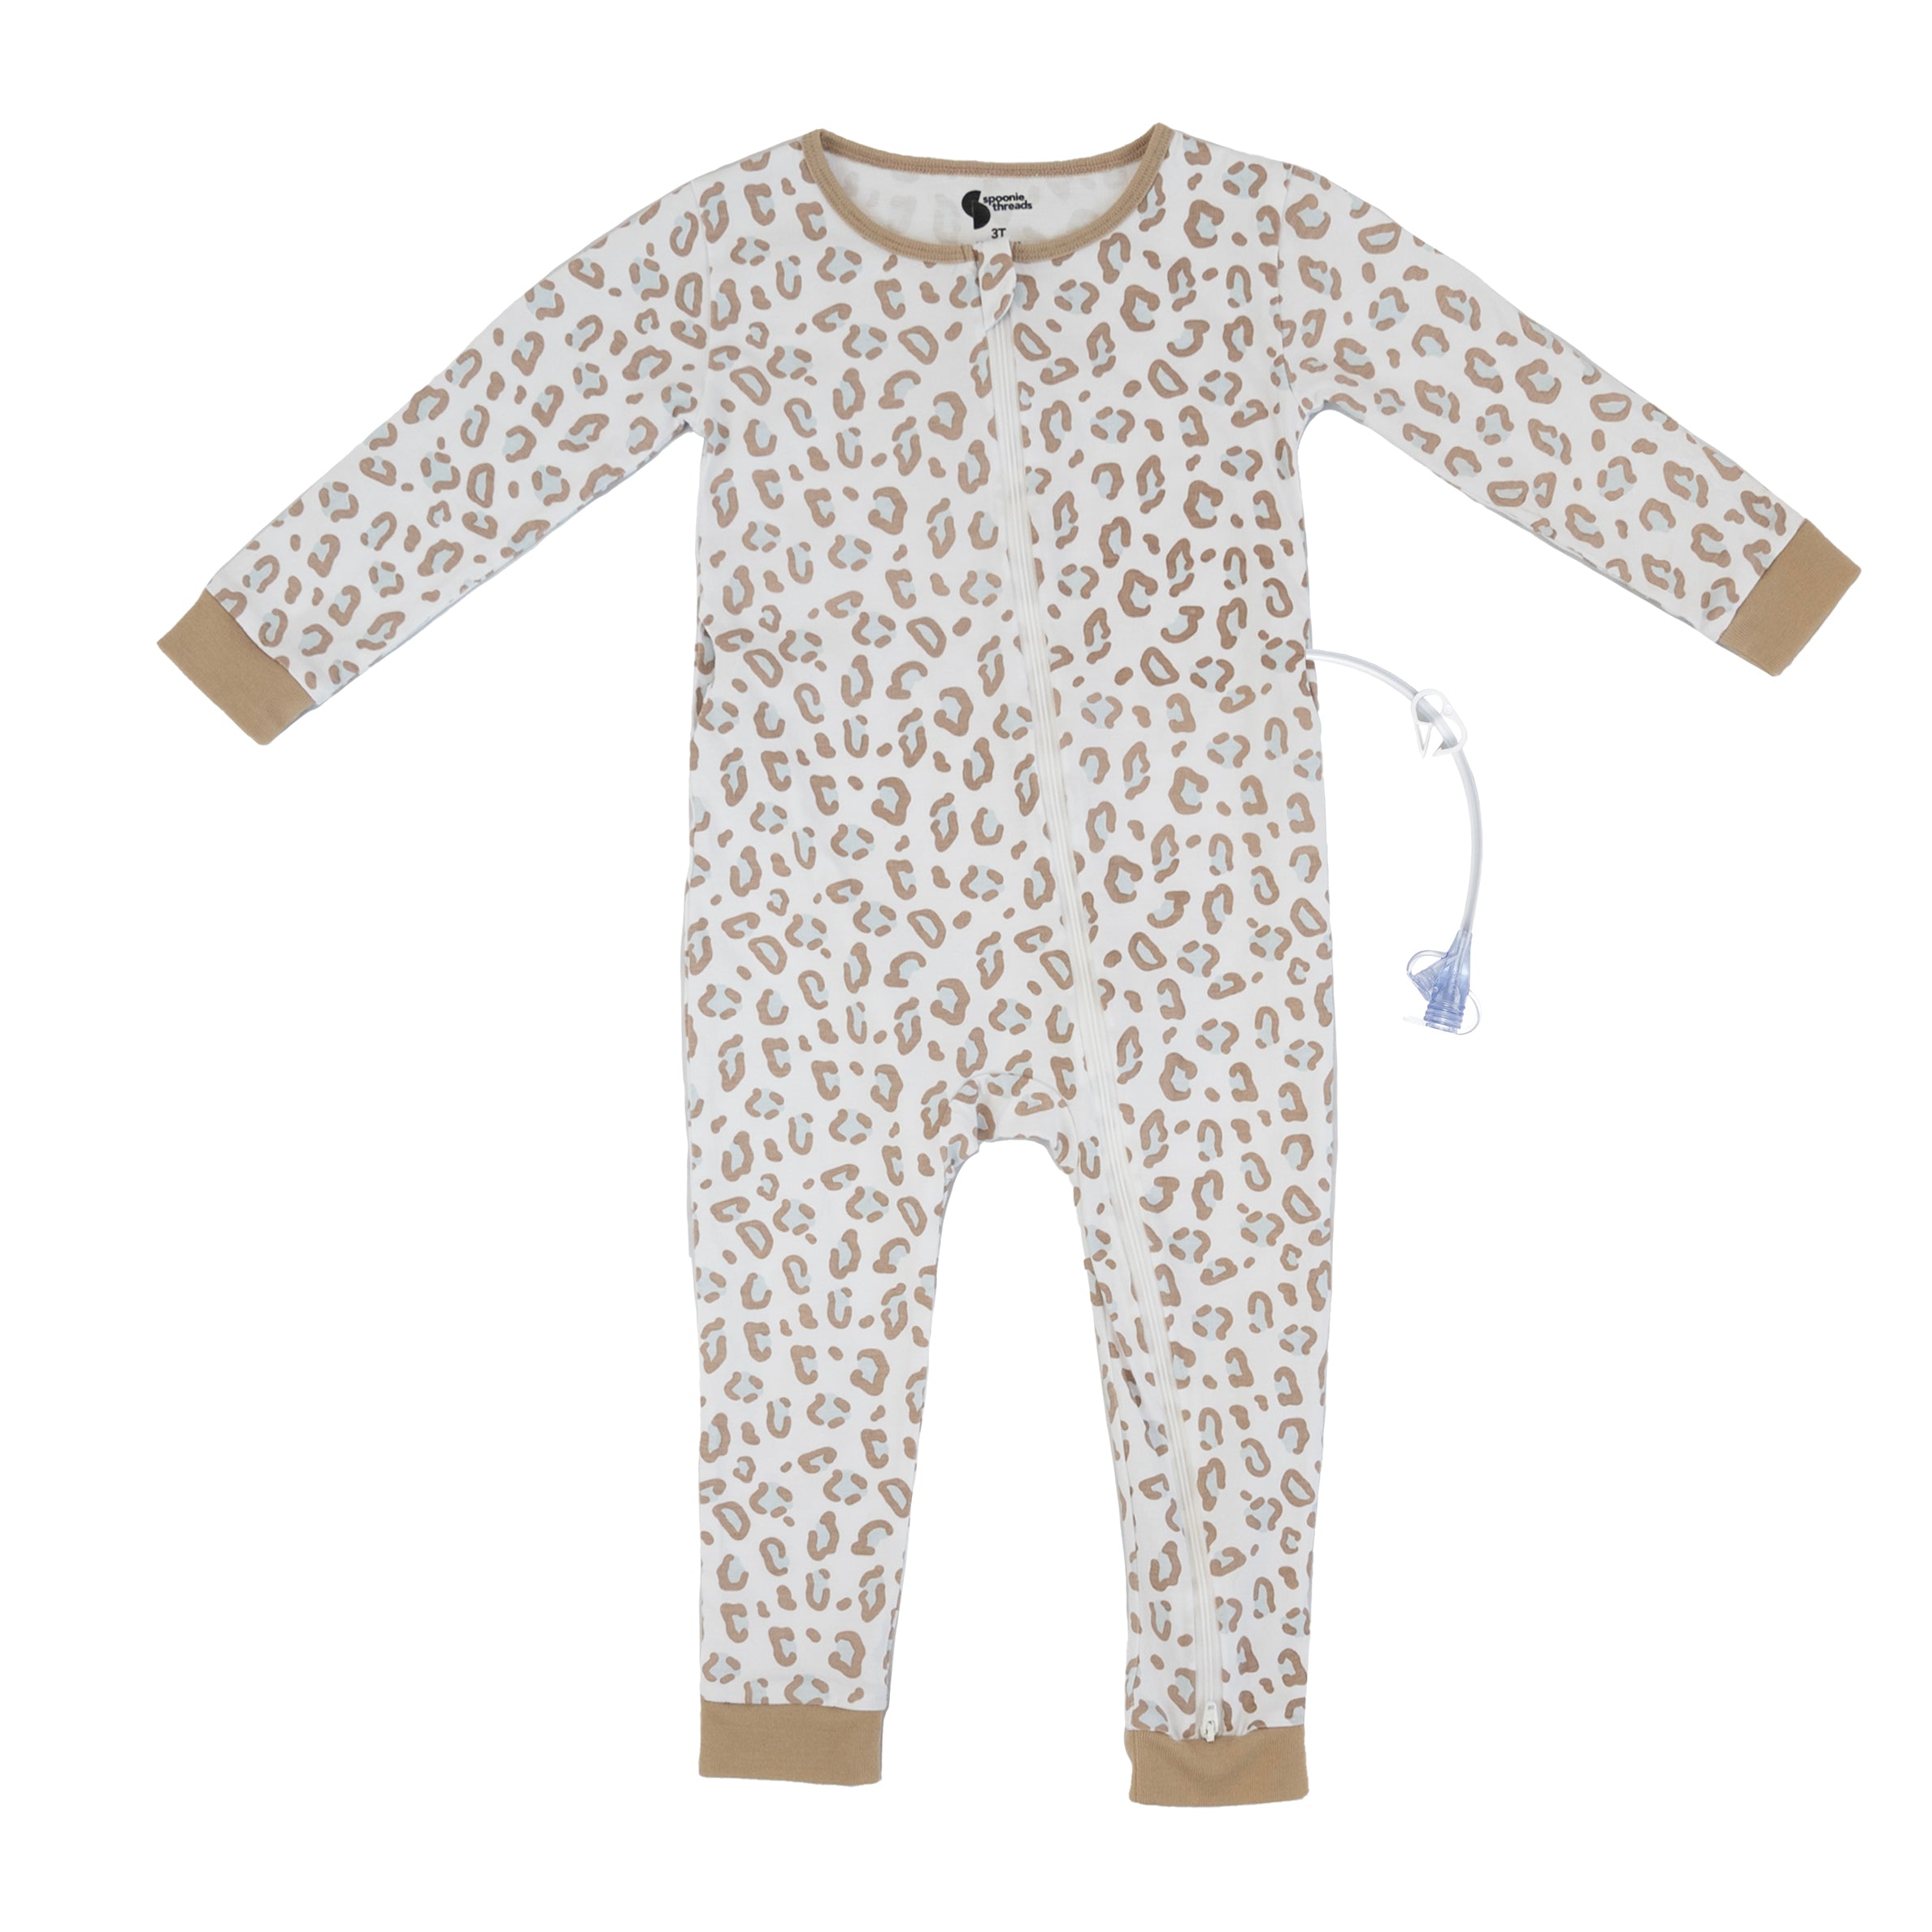 White Leopard Print G Tube Pajamas with Device